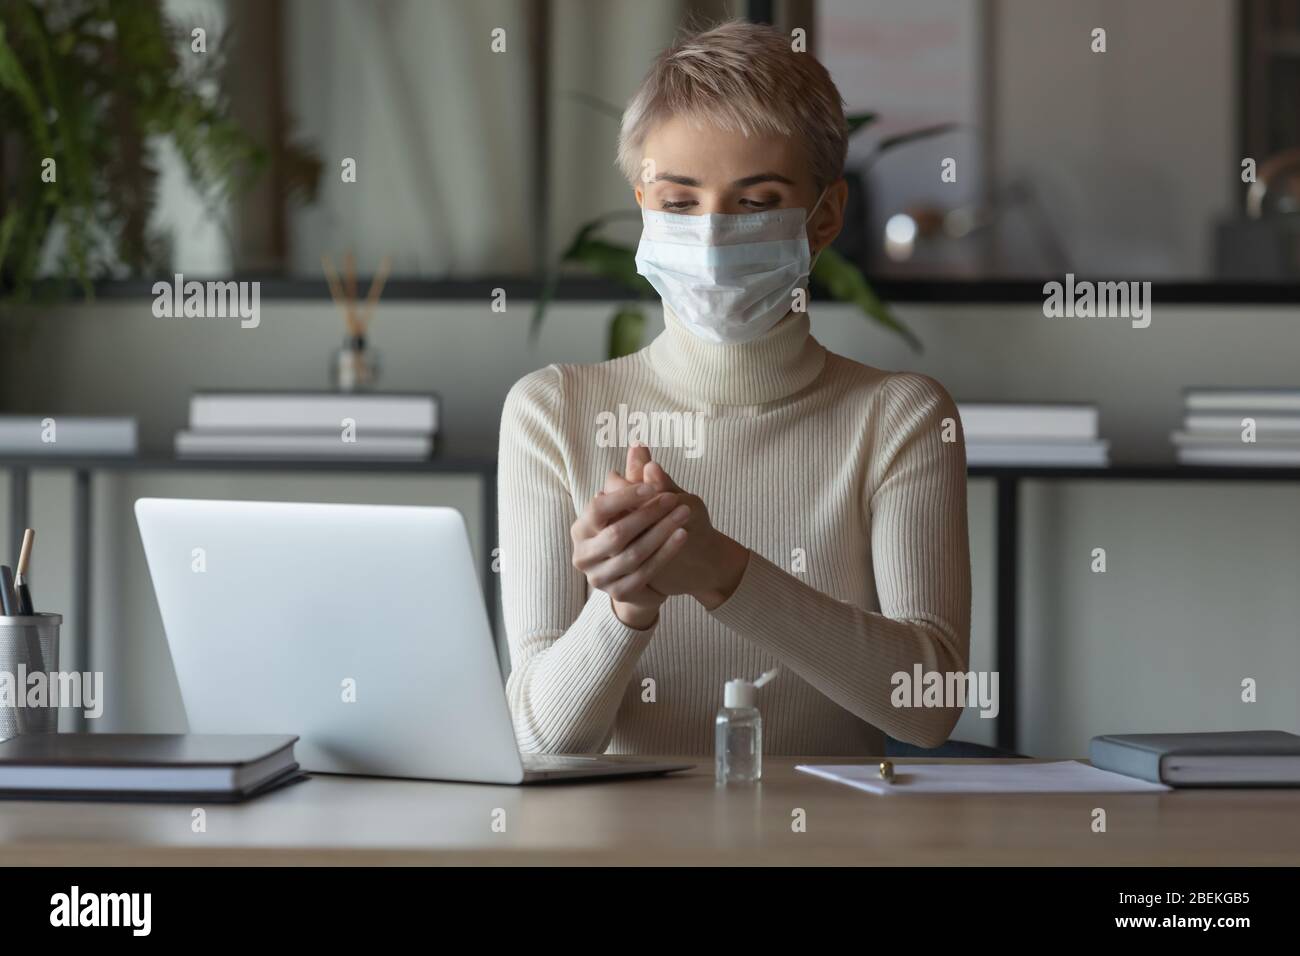 Female employee cleanse hands with sanitizer at workplace Stock Photo